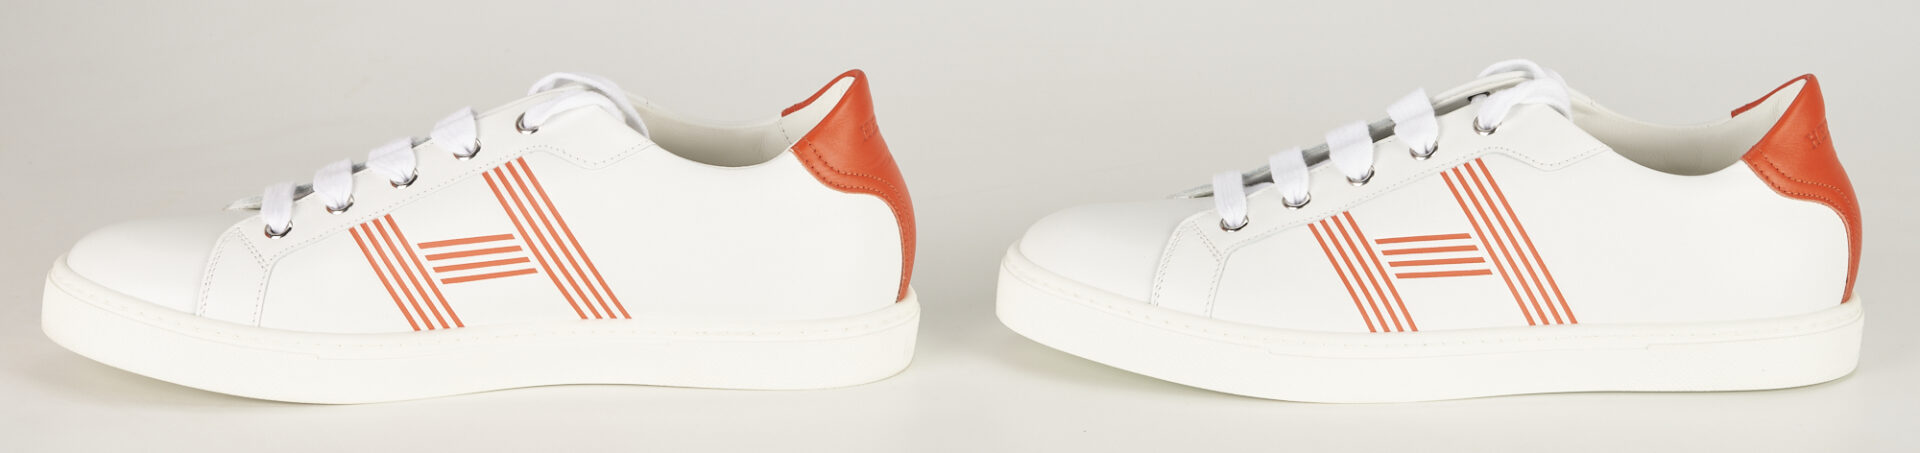 Lot 90: 2 Pairs Hermes Sneakers, incl. Voltage